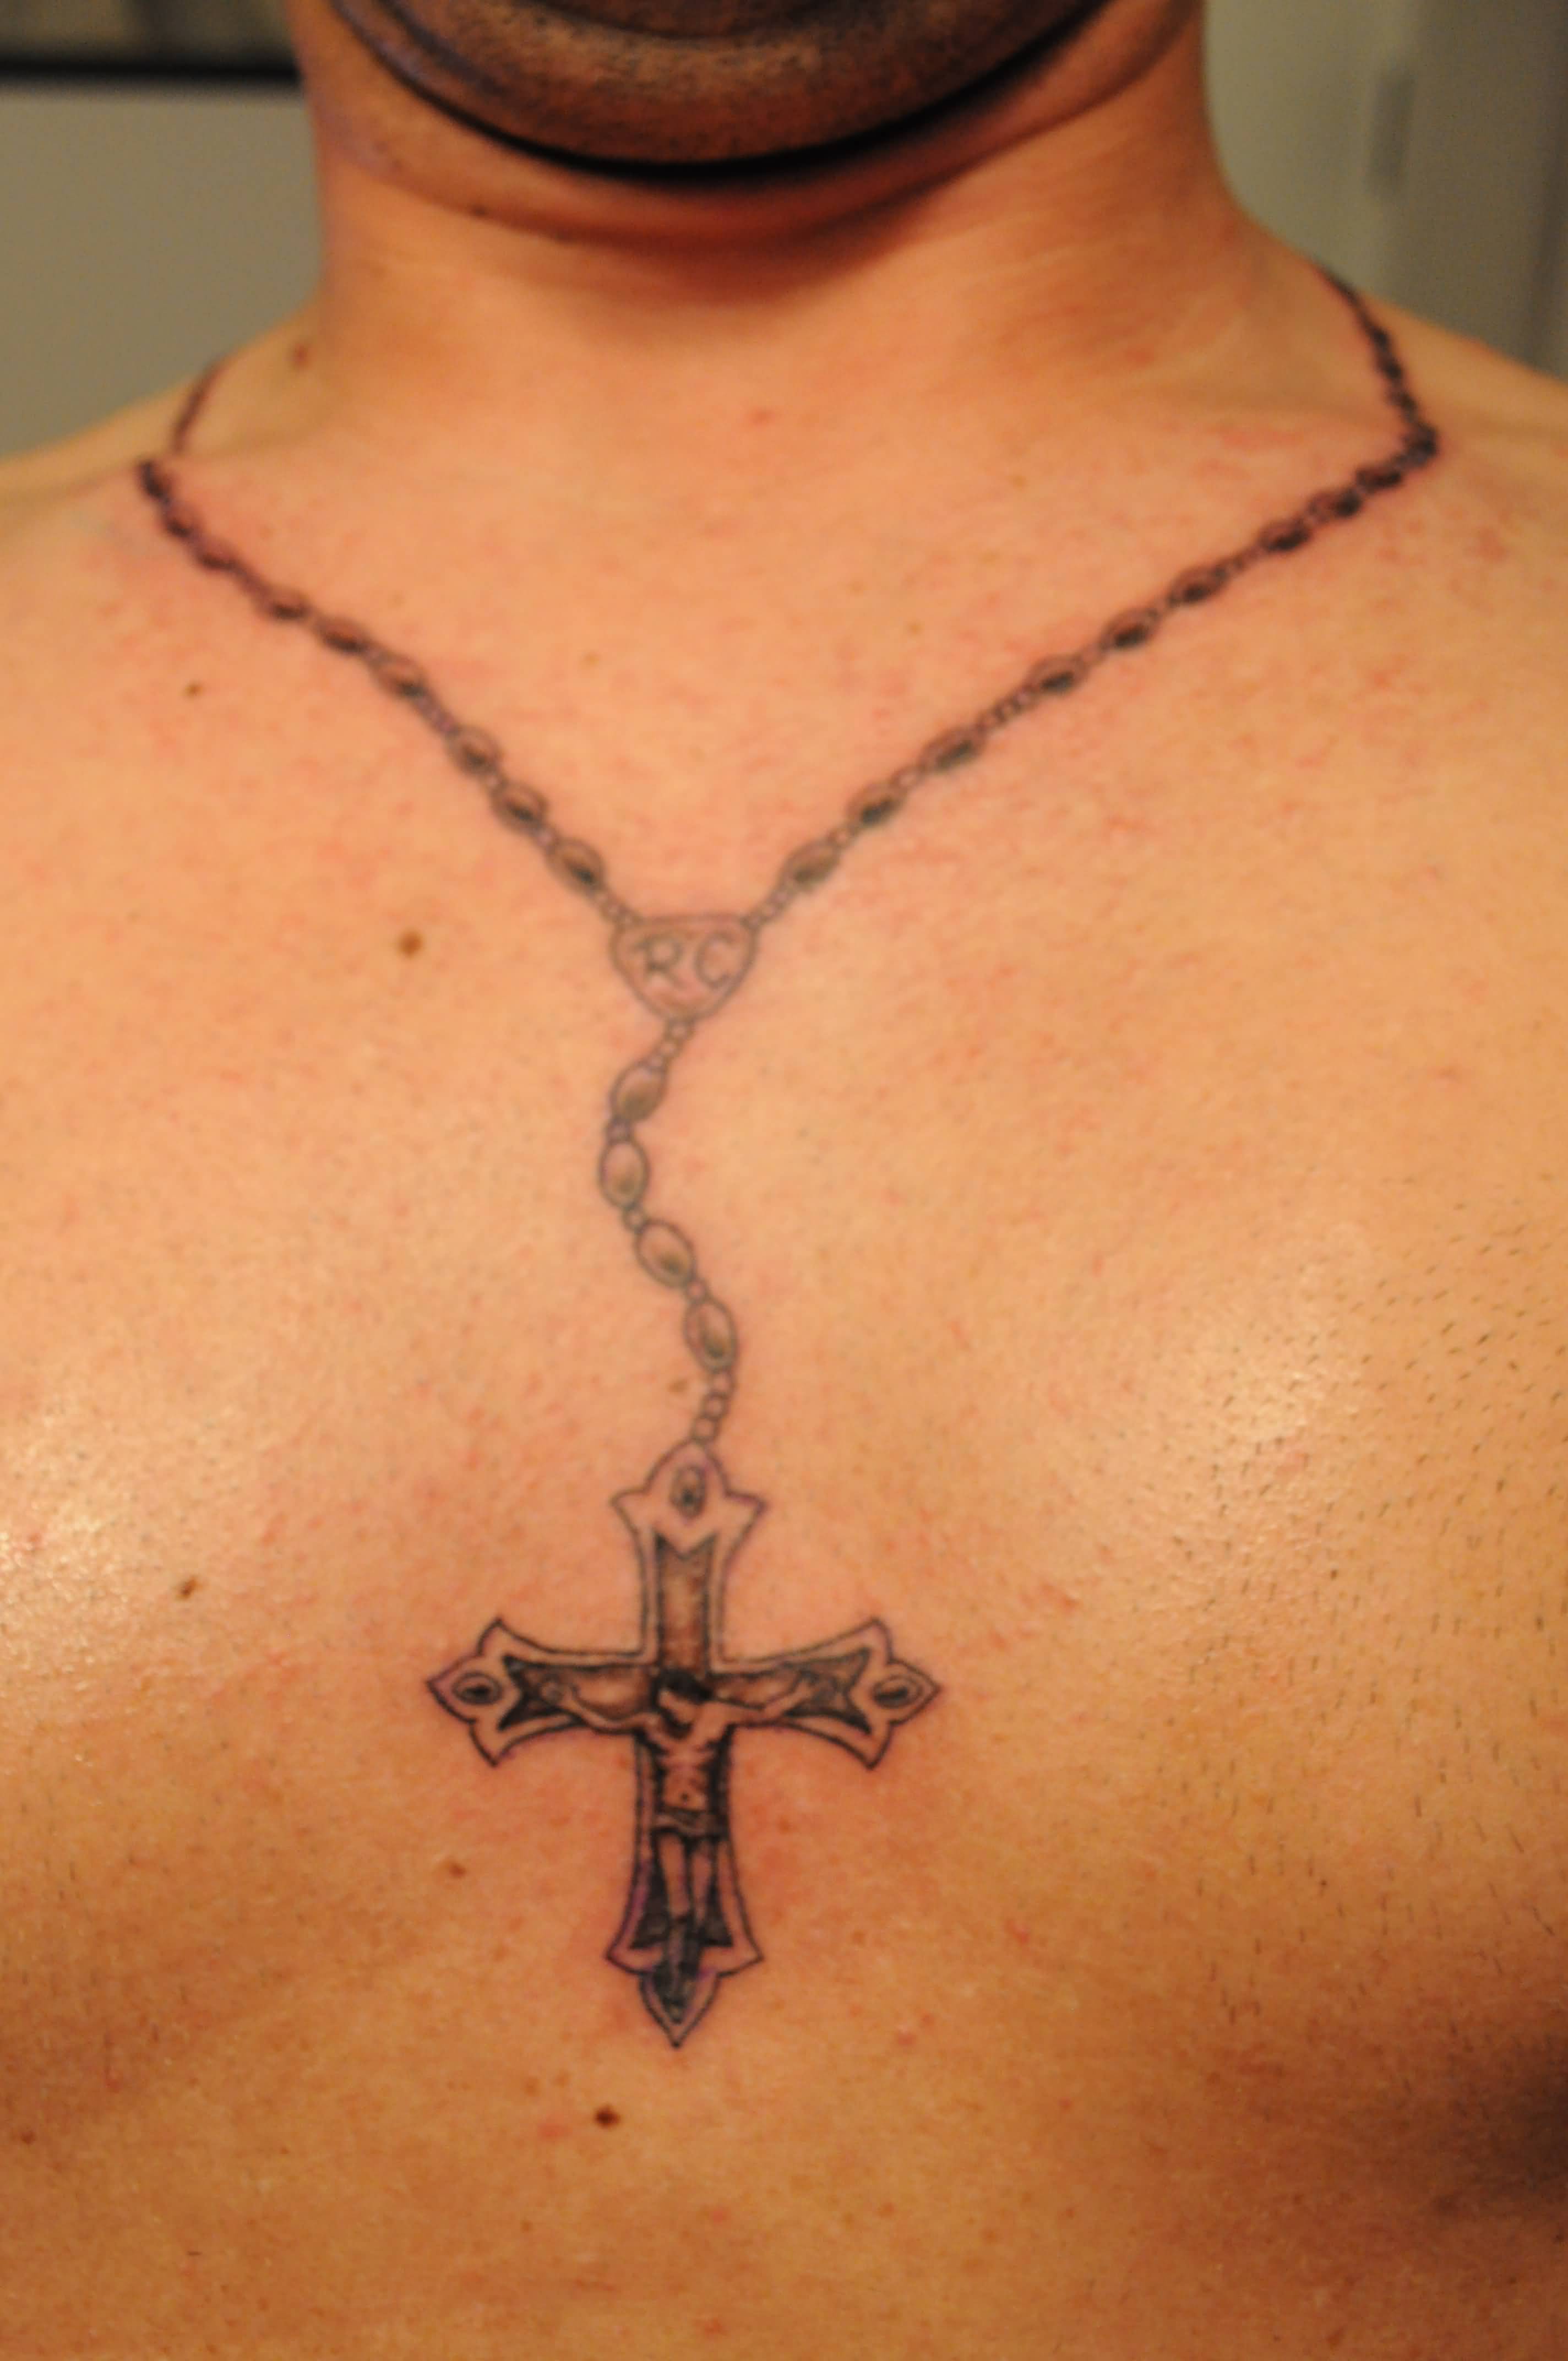 Rosary Necklace Chest Tattoo Piece